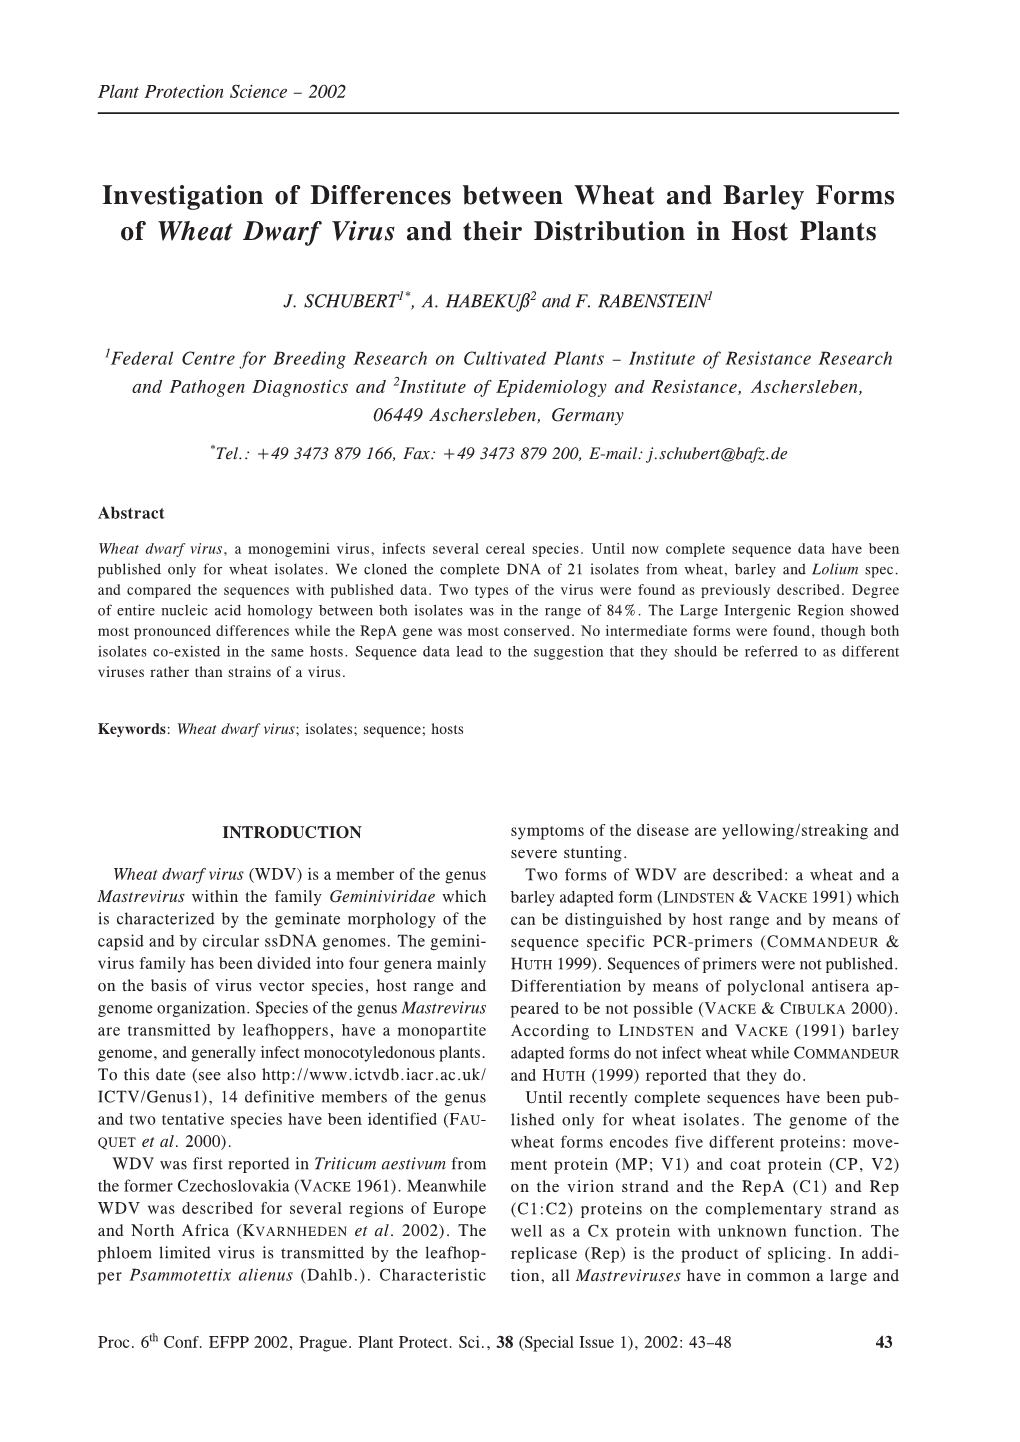 Investigation of Differences Between Wheat and Barley Forms of Wheat Dwarf Virus and Their Distribution in Host Plants